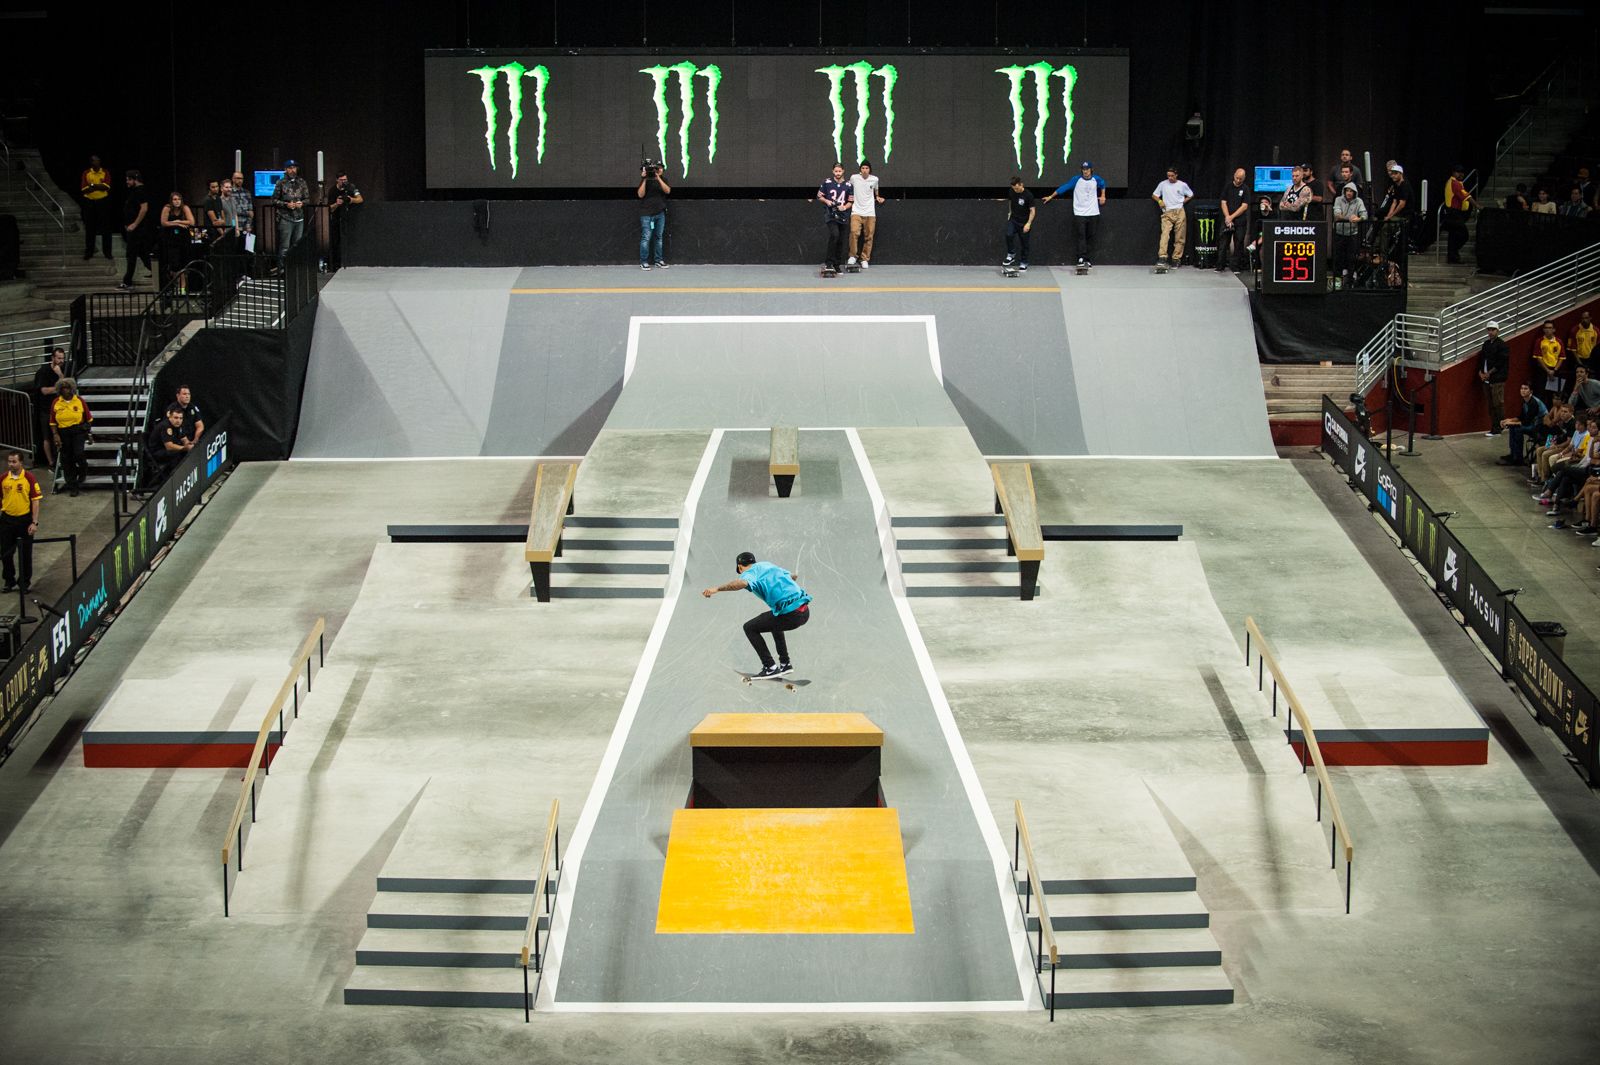 Monster Energy's Nyjah Huston Takes 2nd Place at the SLS Nike SB Super Crown World Championship in Los Angeles